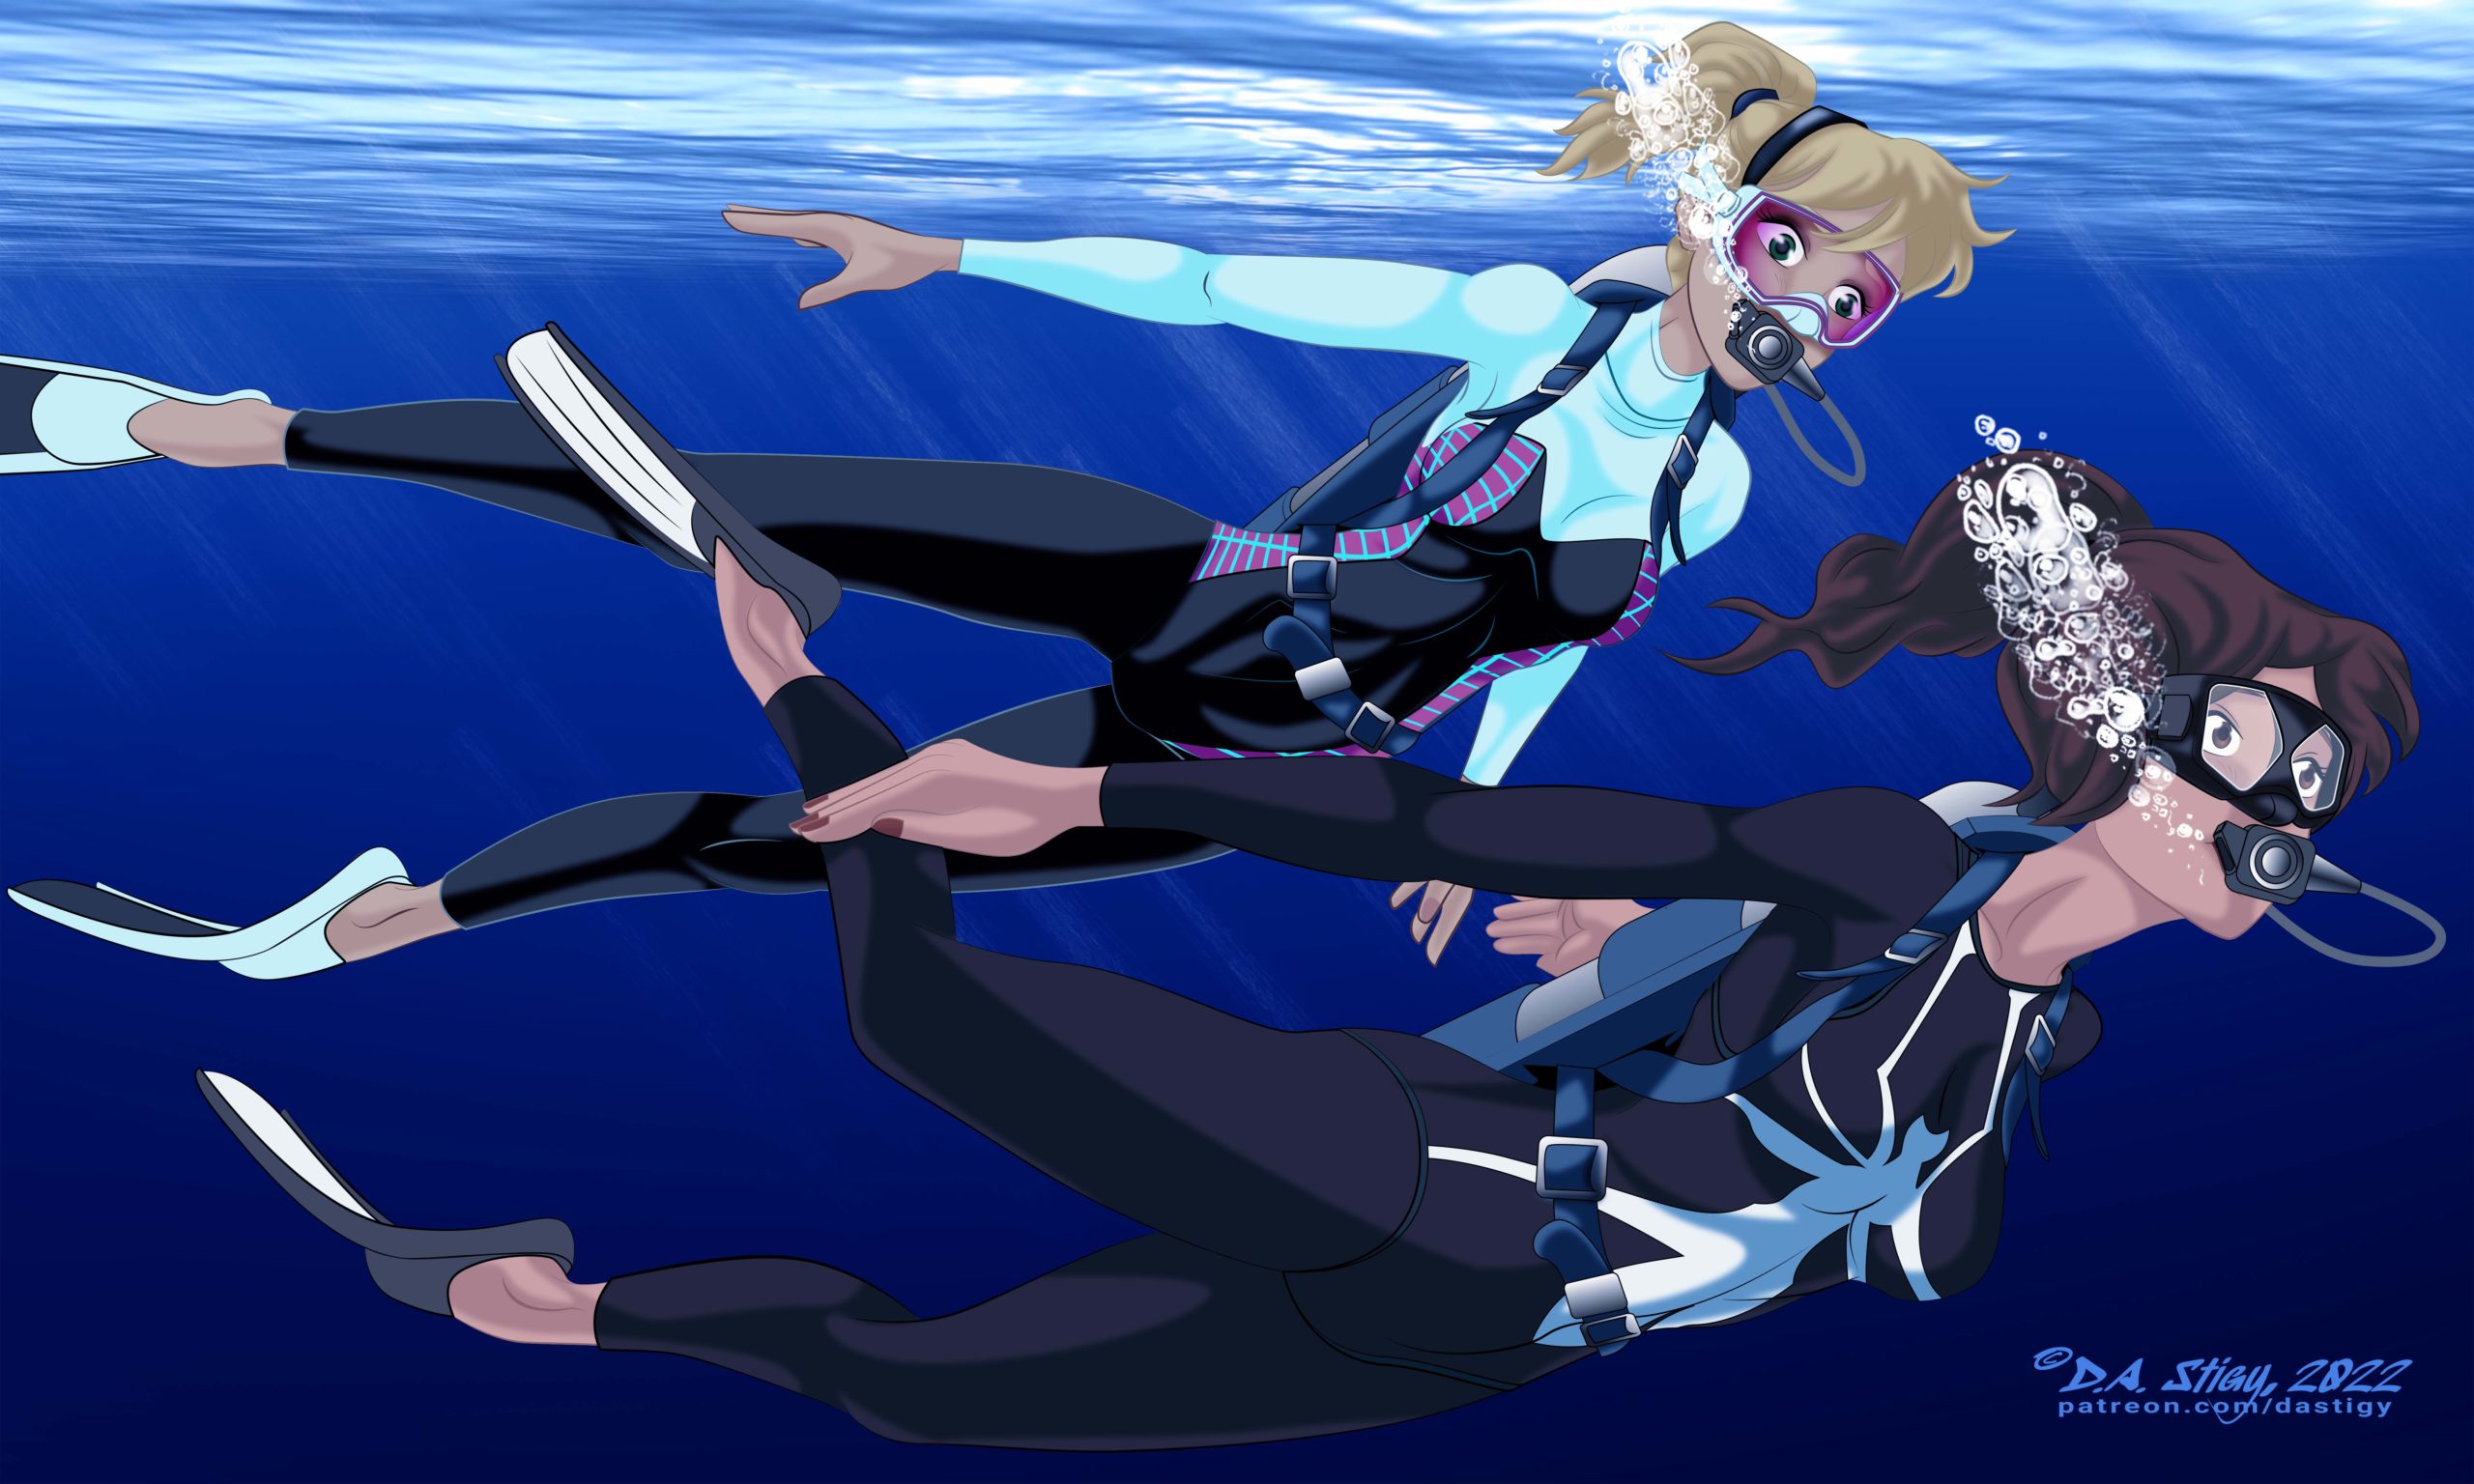 Gwen Stacy and Anya Corazon scuba diving